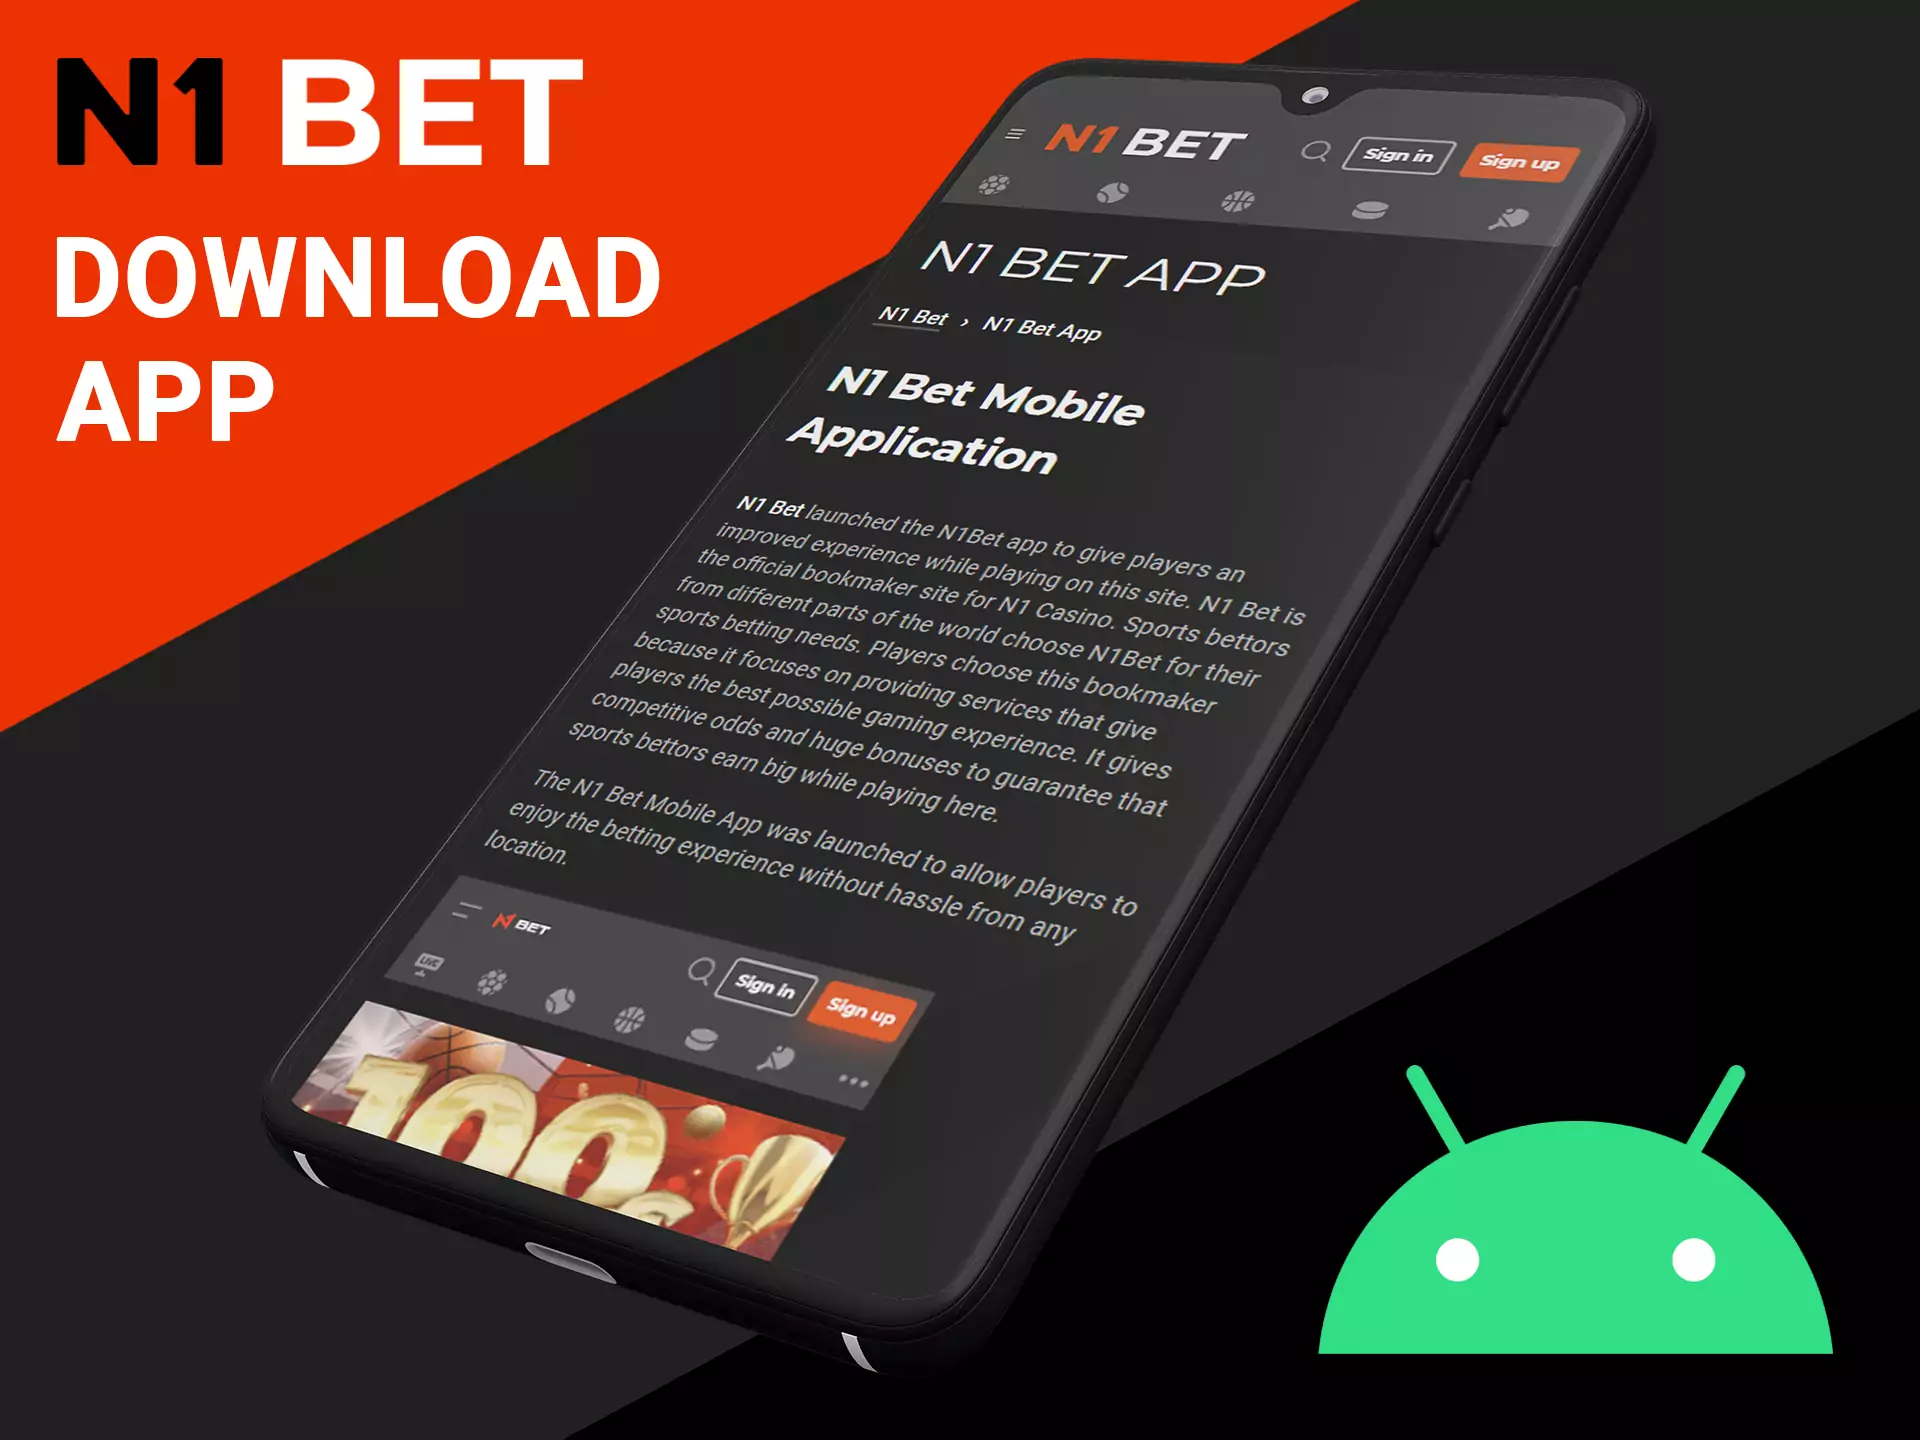 N1Bet is available on many Android devices.